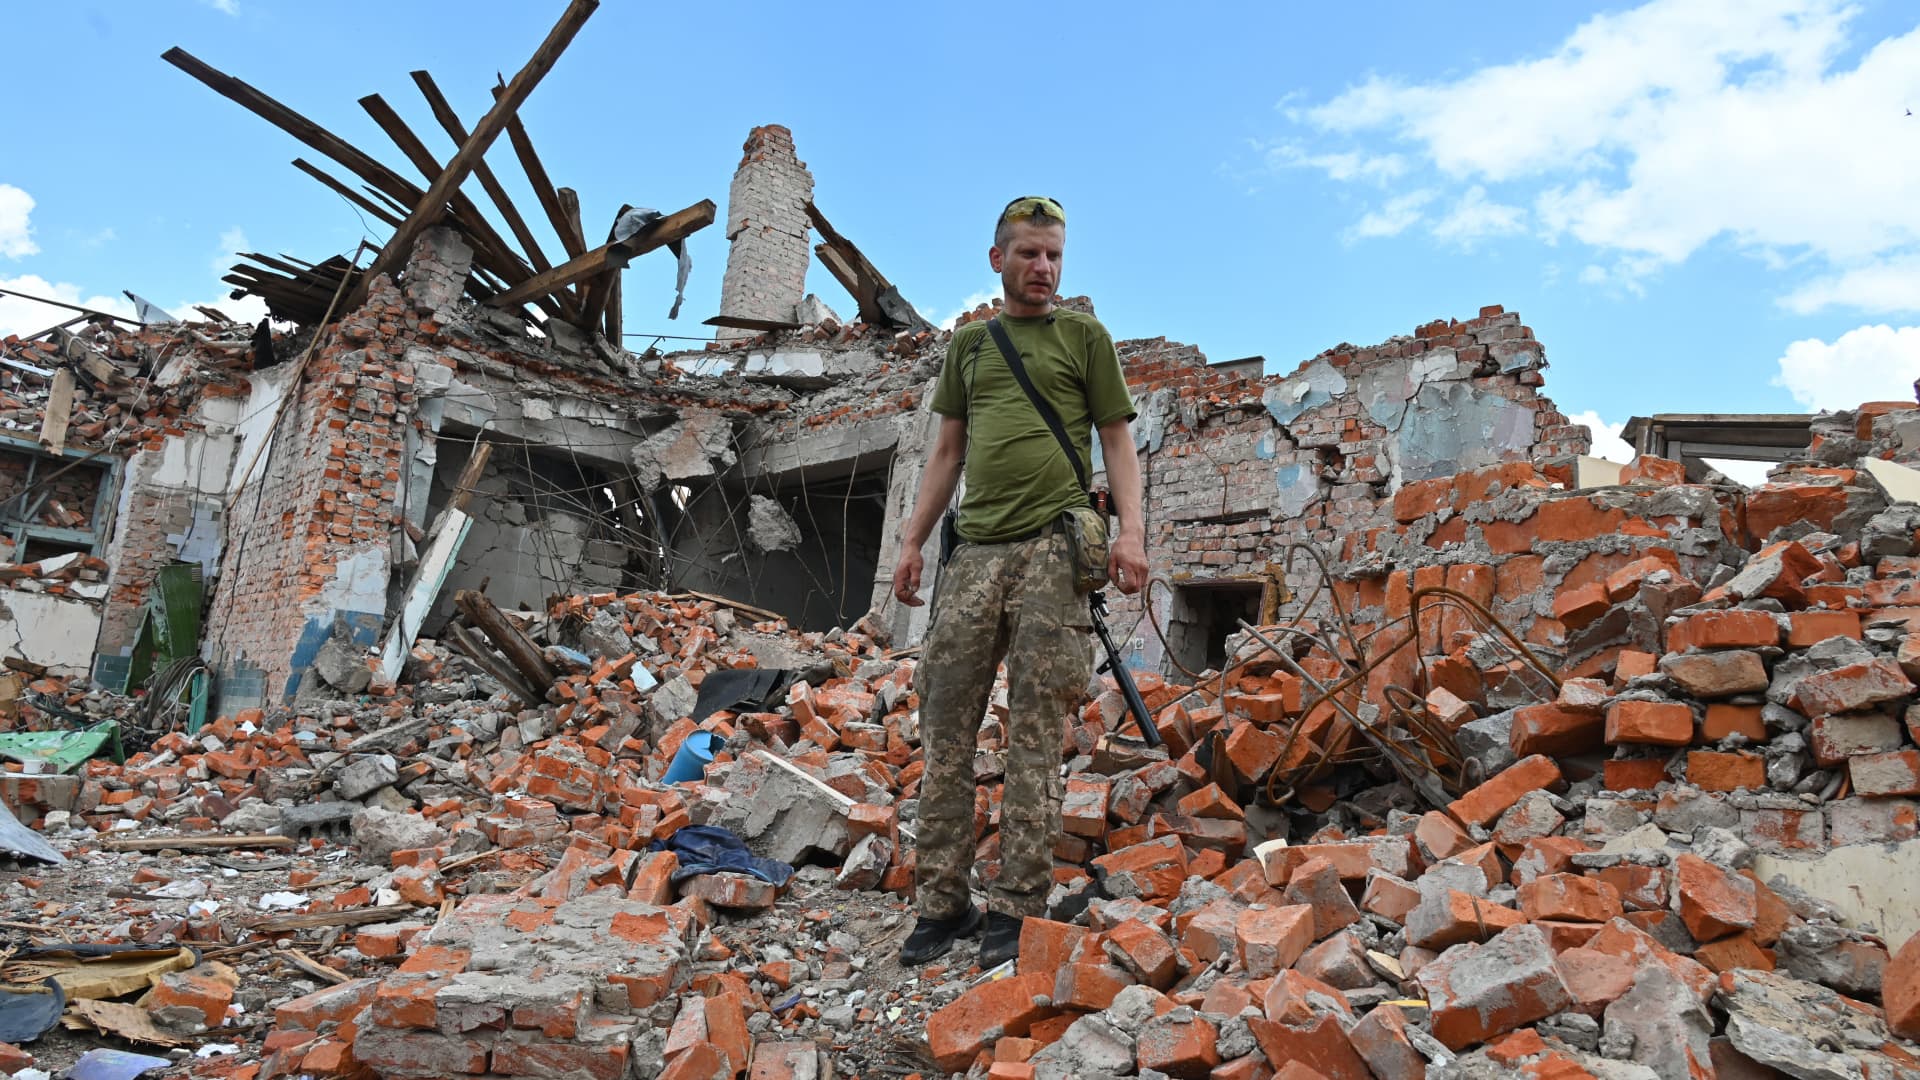 A Ukrainian serviceman inspects the ruins of Lyceum building, suspected to have been destroyed after a missile strike near Kharkiv on July 5, 2022, amid the Russian invasion of Ukraine.